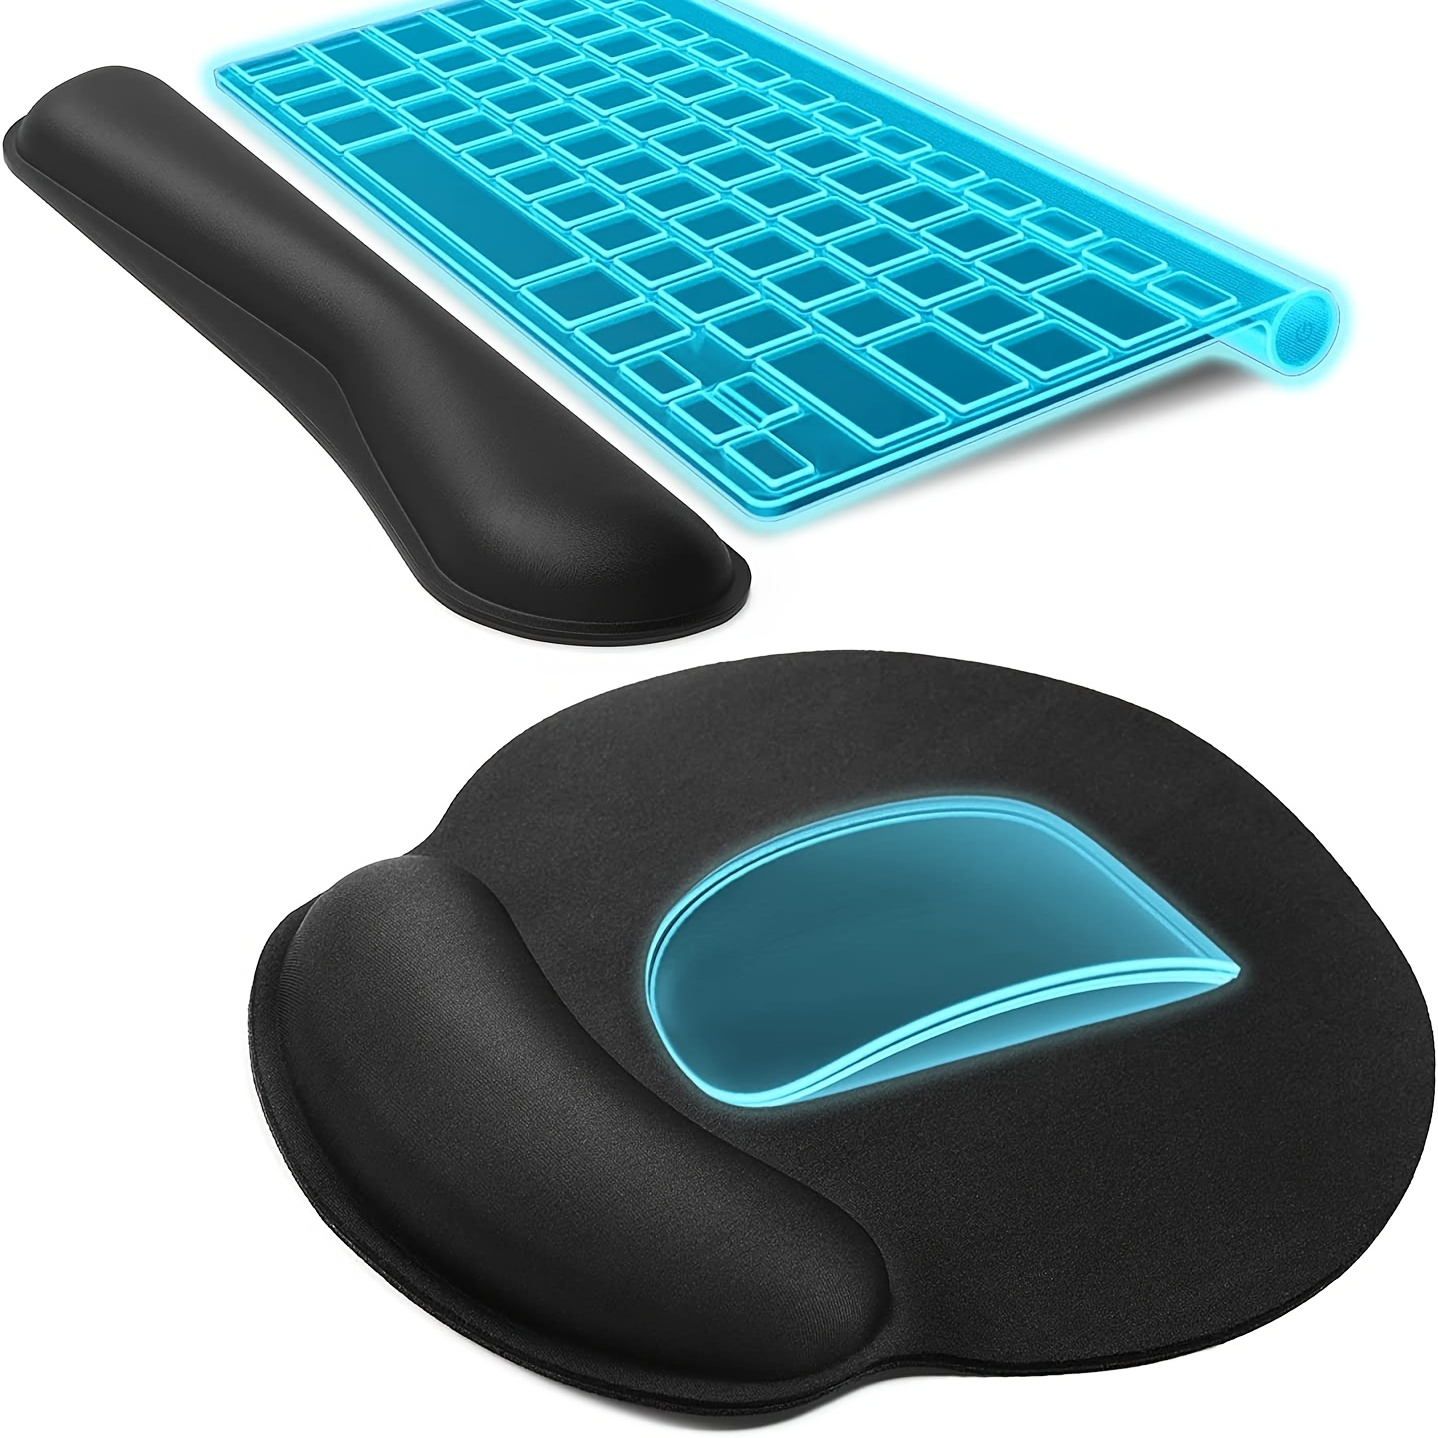 Ergonomic Mouse Pad, With Wrist Support, Comfortable Keyboard Wrist Rest,  Keyboard Memory Foam Wrist Pad, Mouse Pad Set, Convenient For Typing And Com